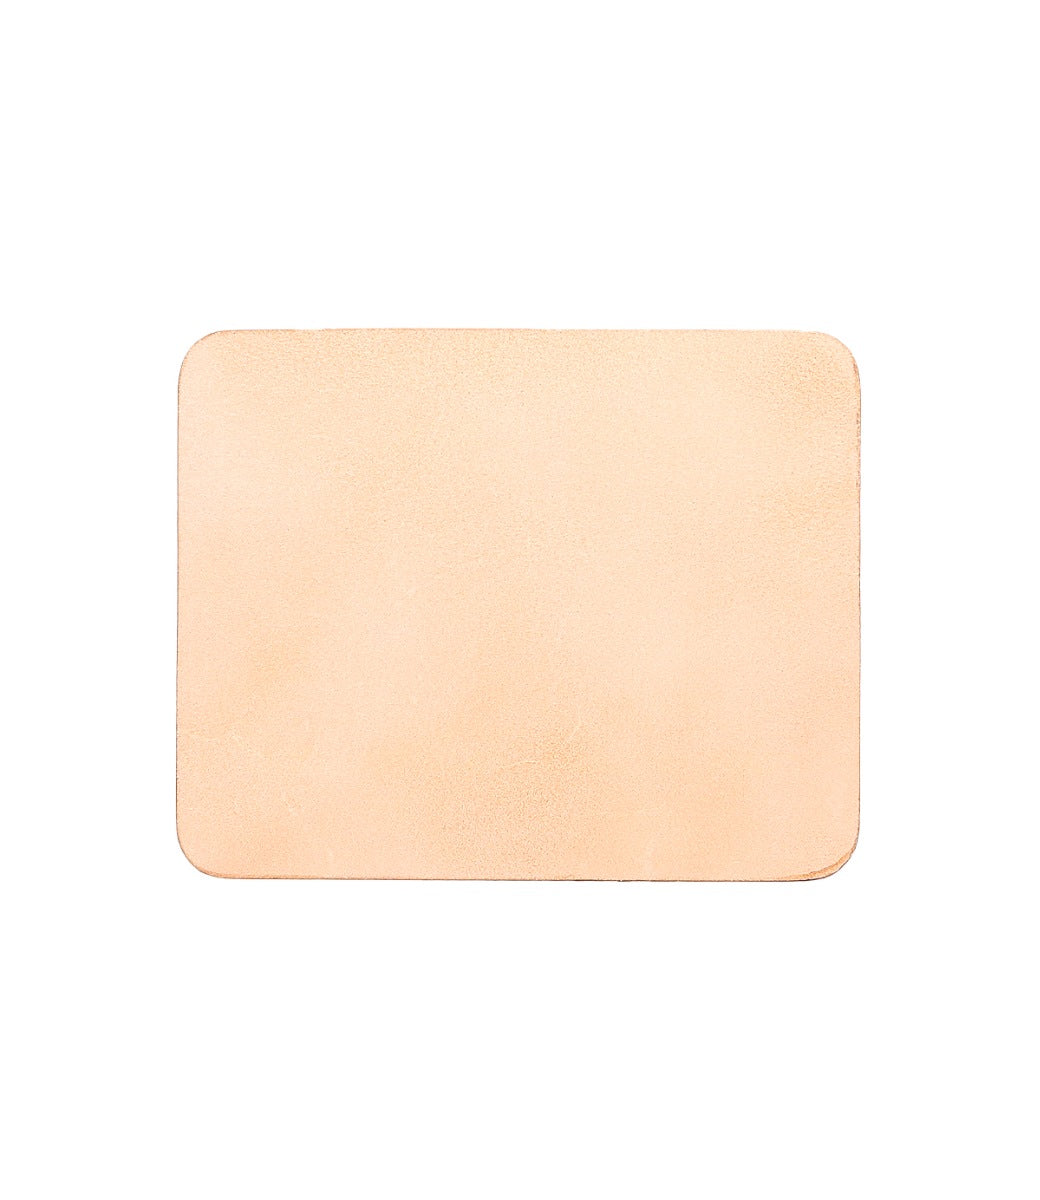 A beige piece of Bed Stu leather on a white background.